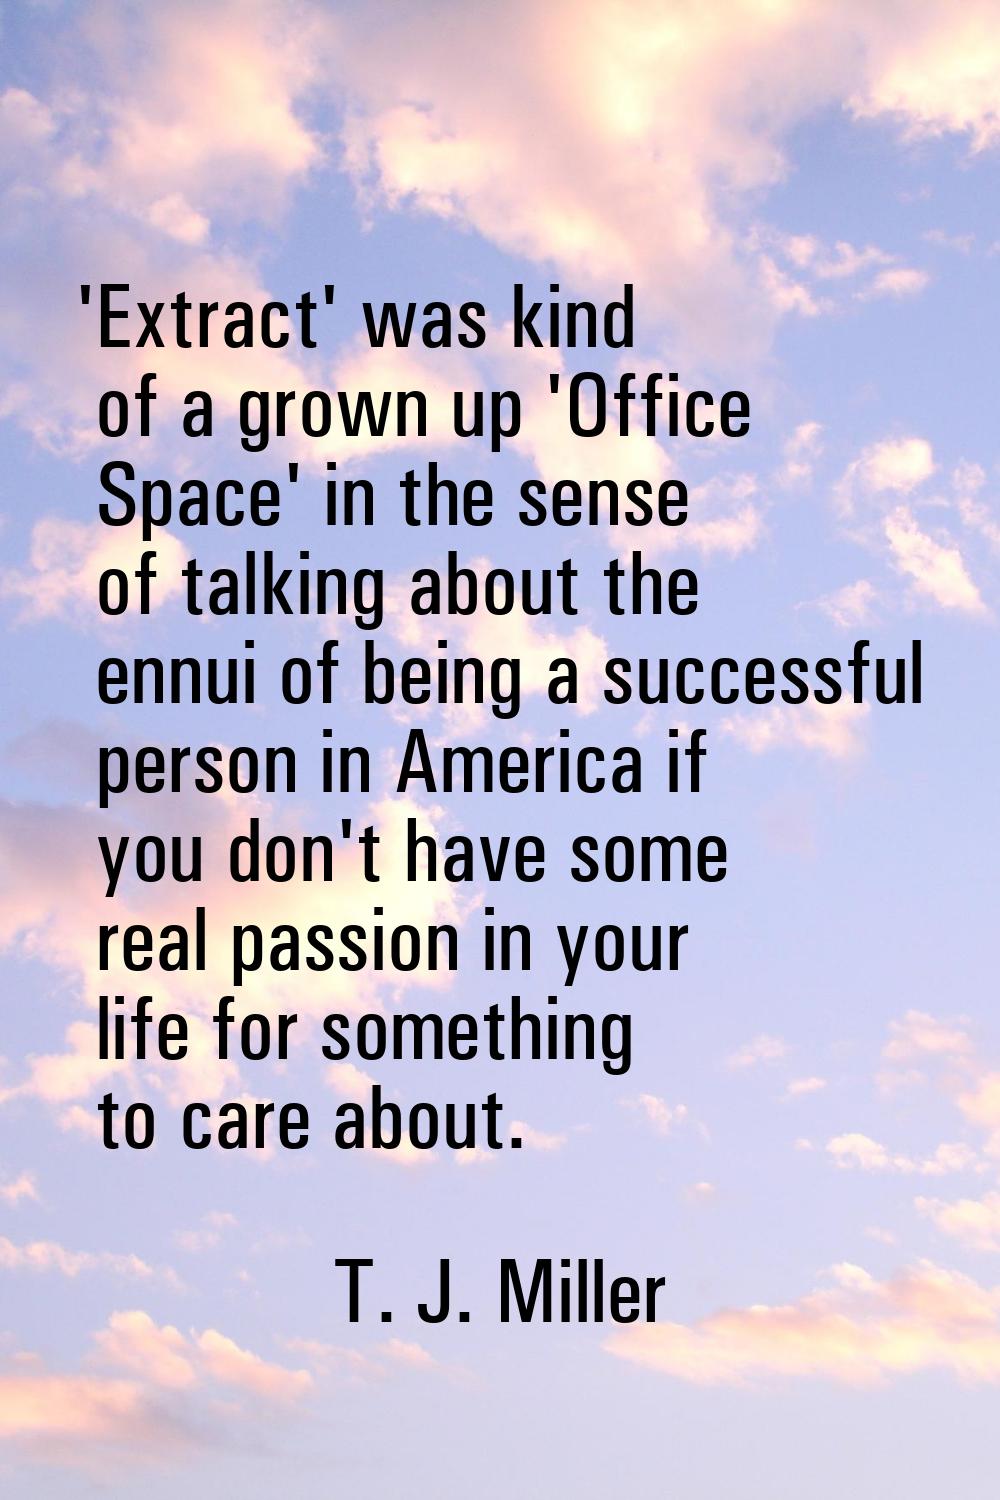 'Extract' was kind of a grown up 'Office Space' in the sense of talking about the ennui of being a 